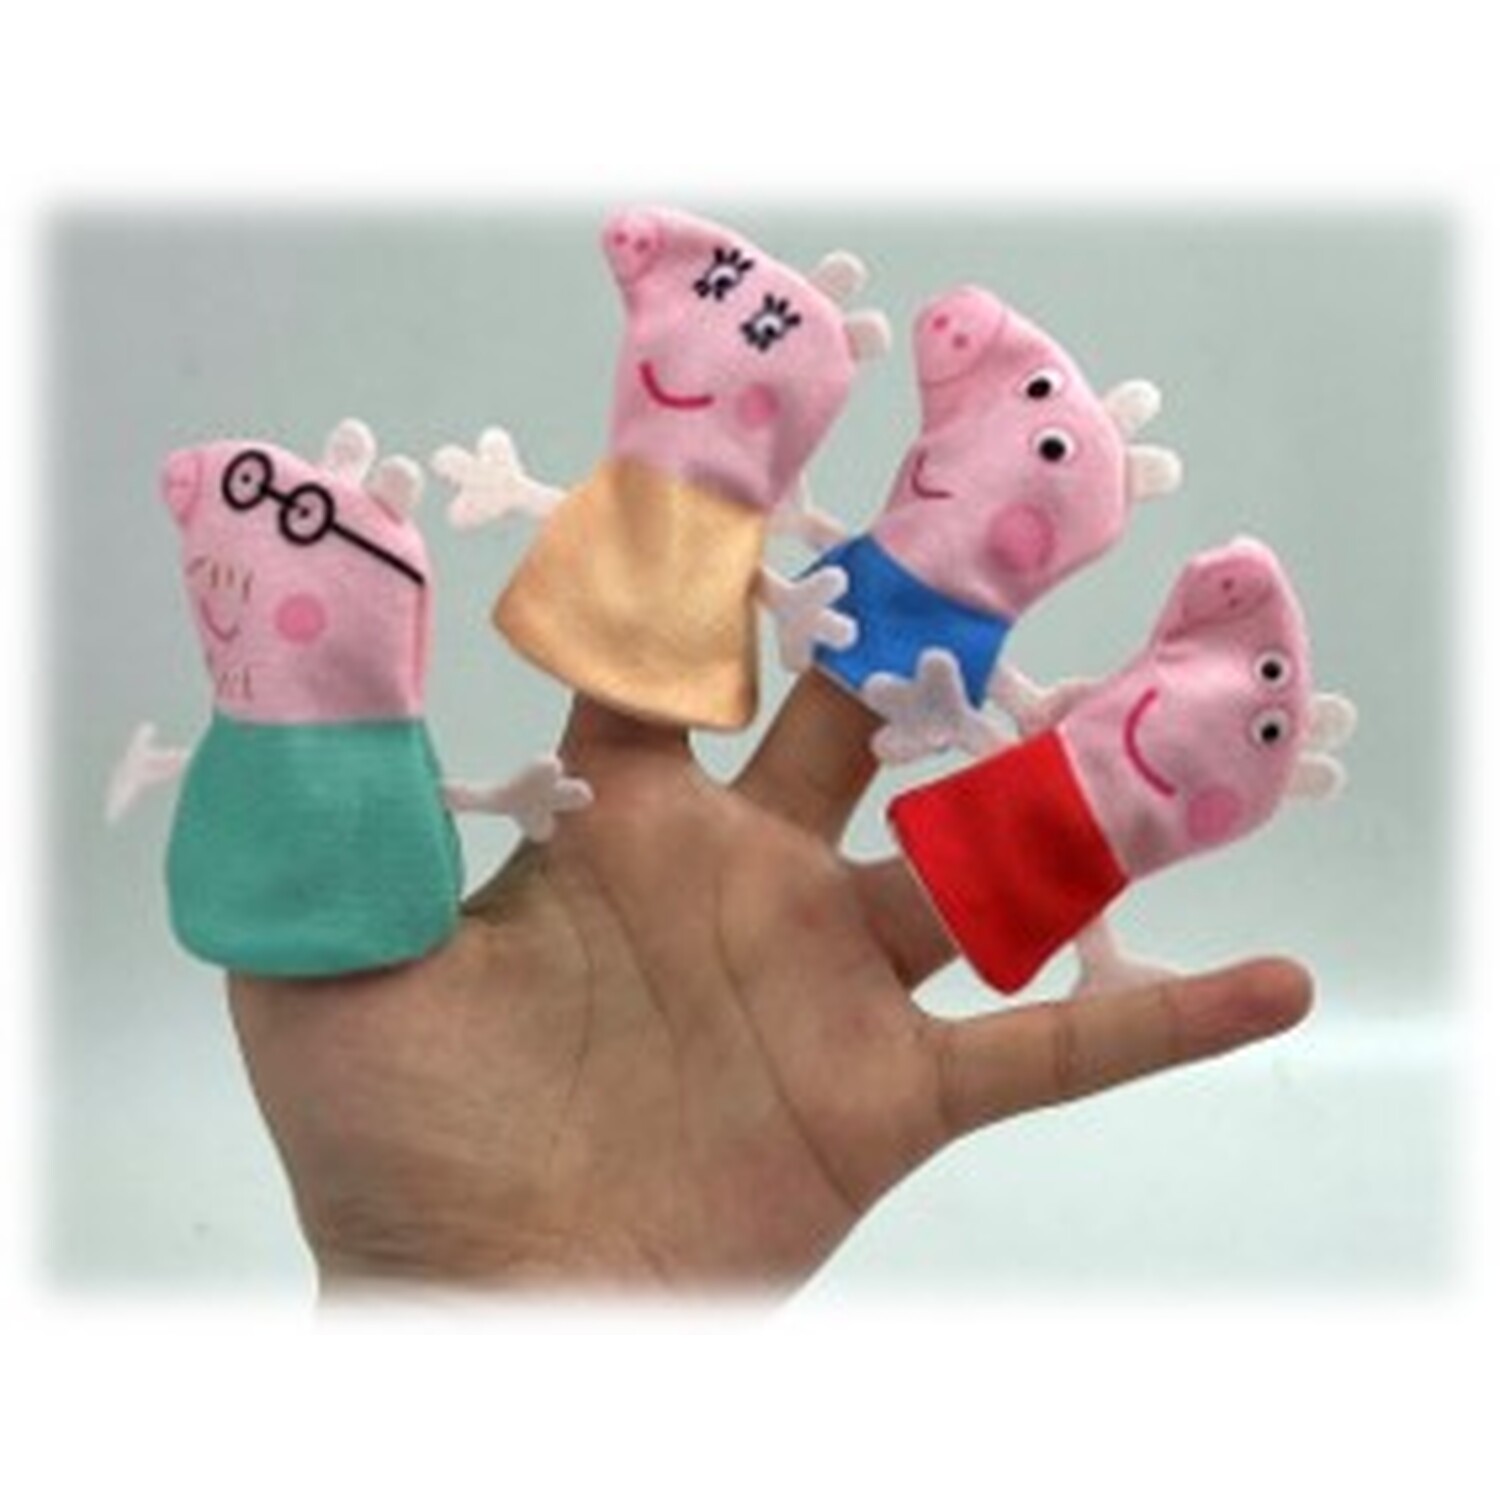 Peppa Pig Finger Puppet Toy 4 Pack Image